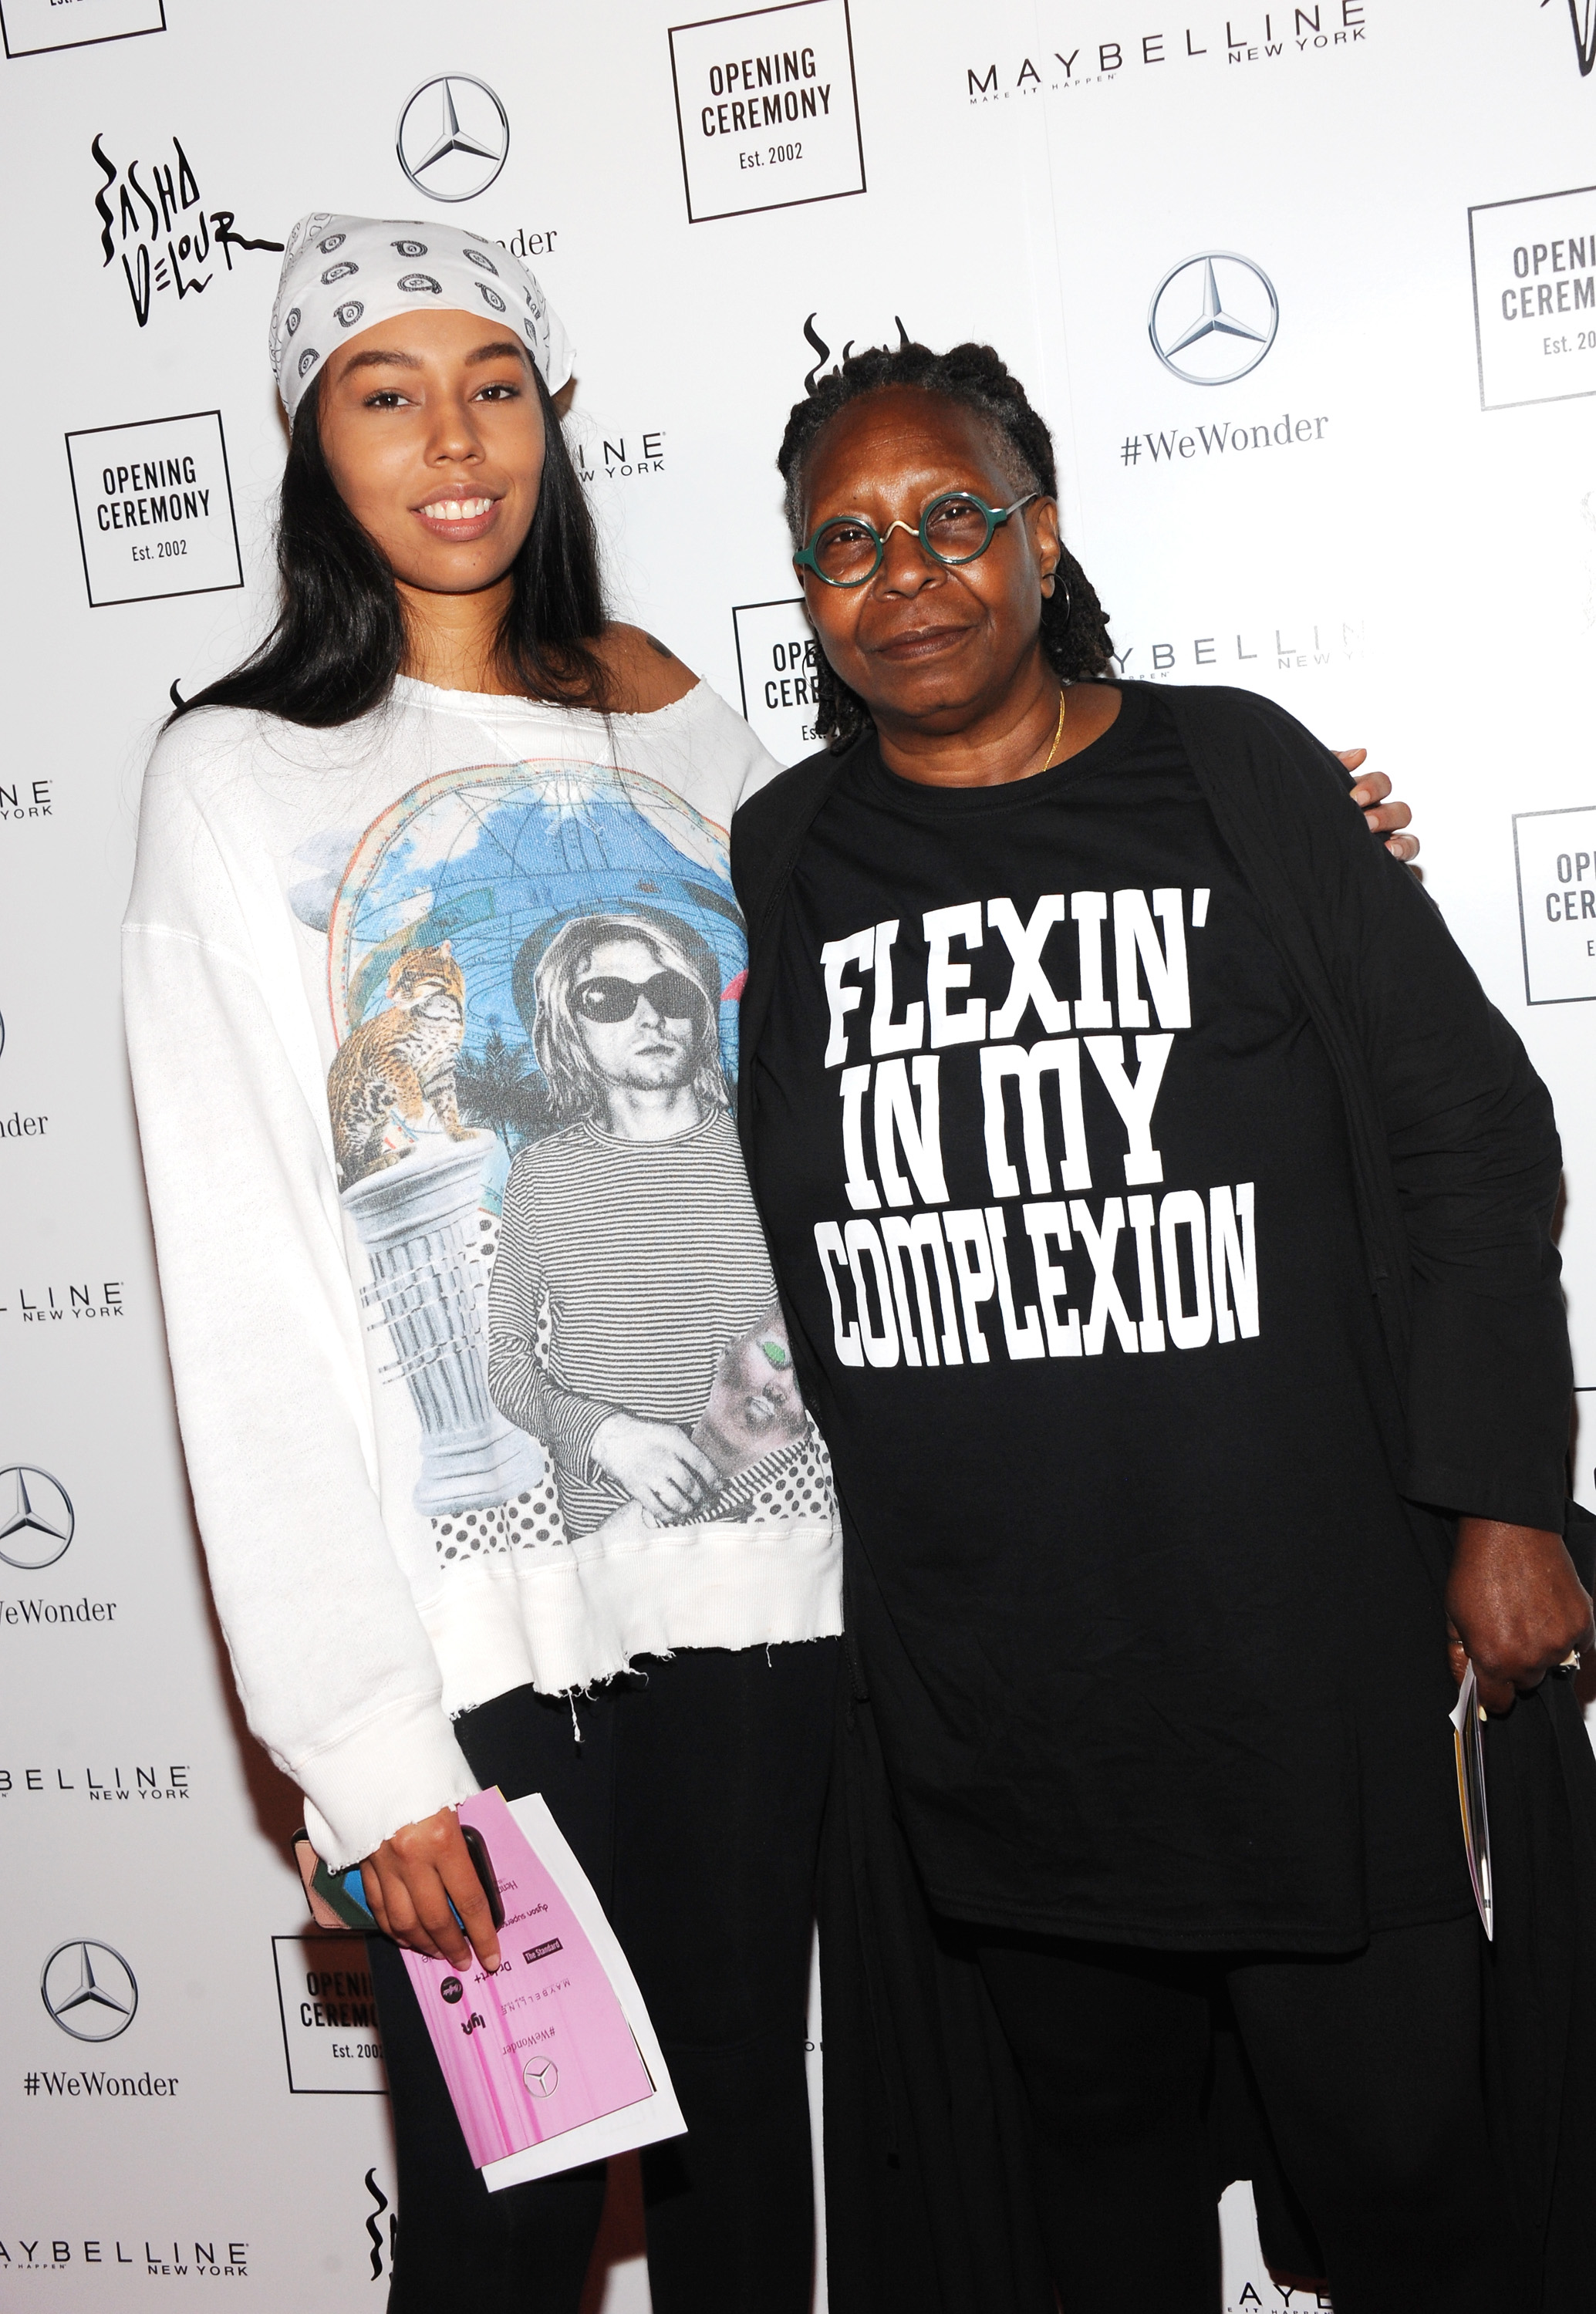 Whoopi Goldberg with her granddaughter, Jerzey Dean at the New York Fashion Week opening ceremony in 2018 | Source: Getty Images